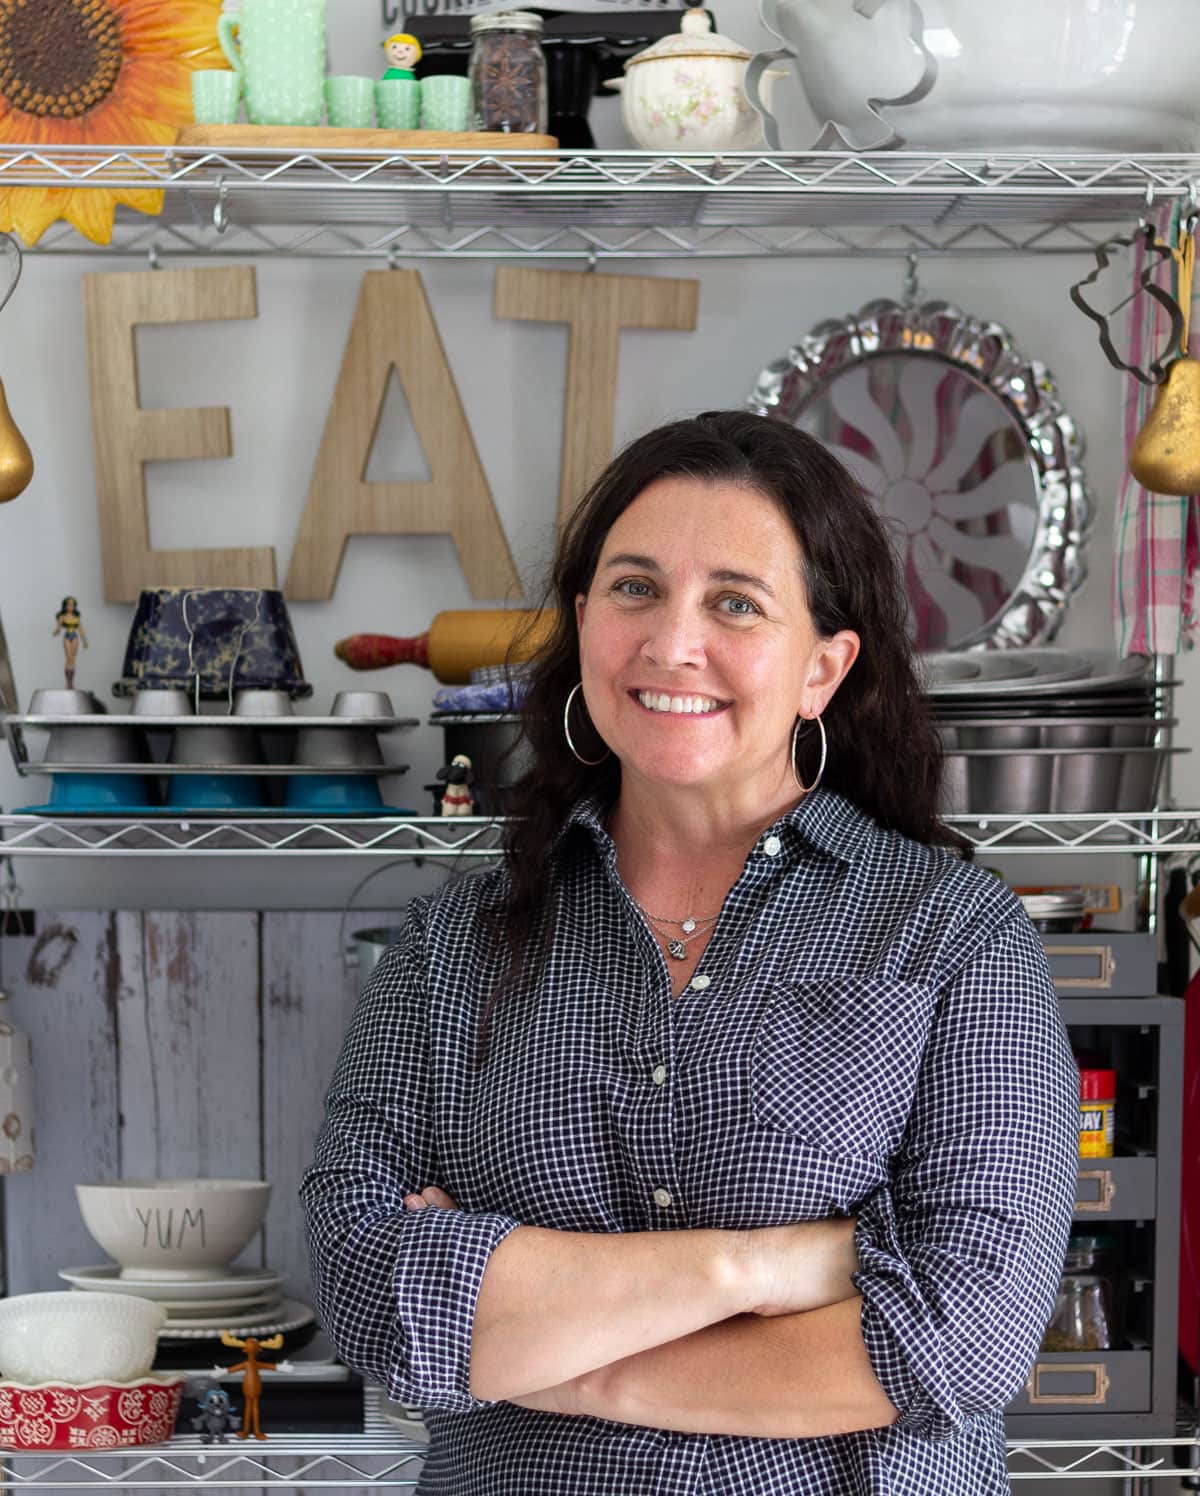 Woman smiling and arms folded in front of letters that spell "eat".